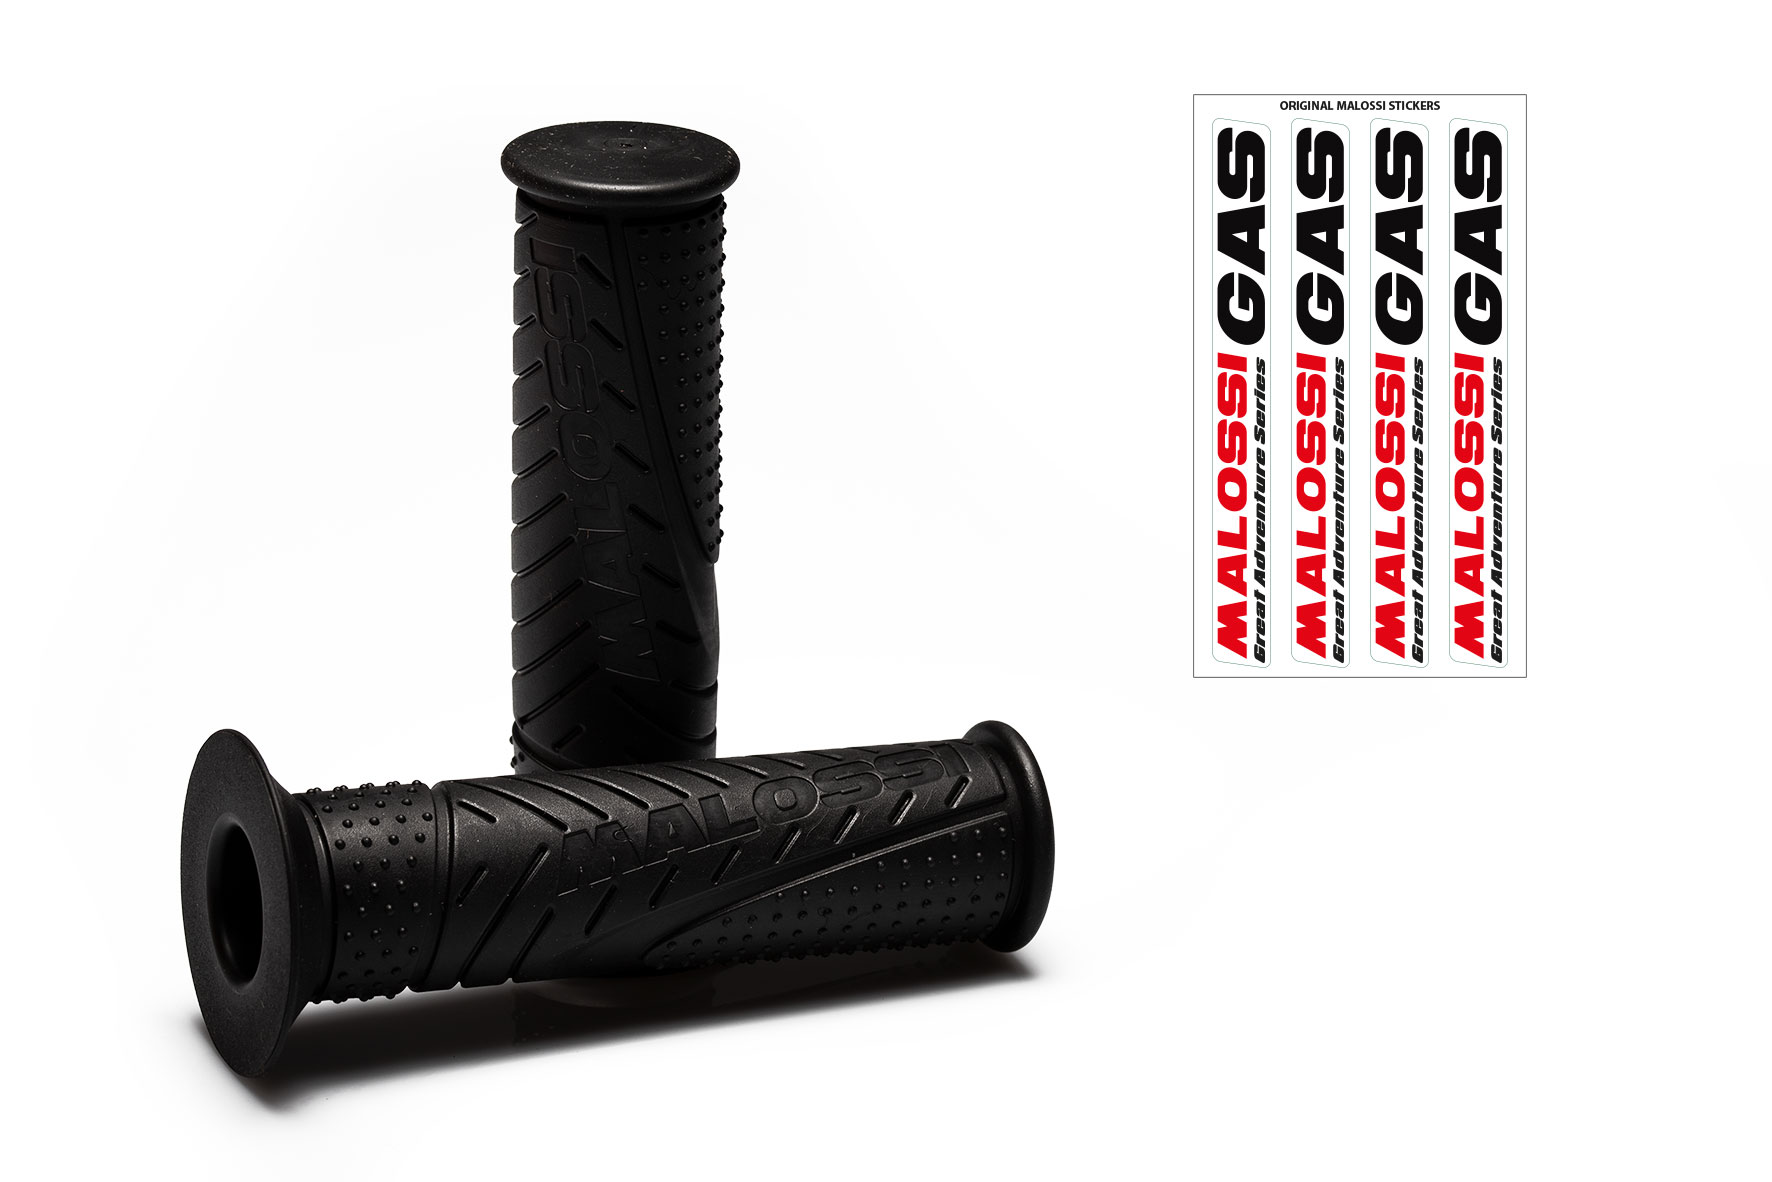 2 MALOSSI MHR BLACK grips - model with side fastening